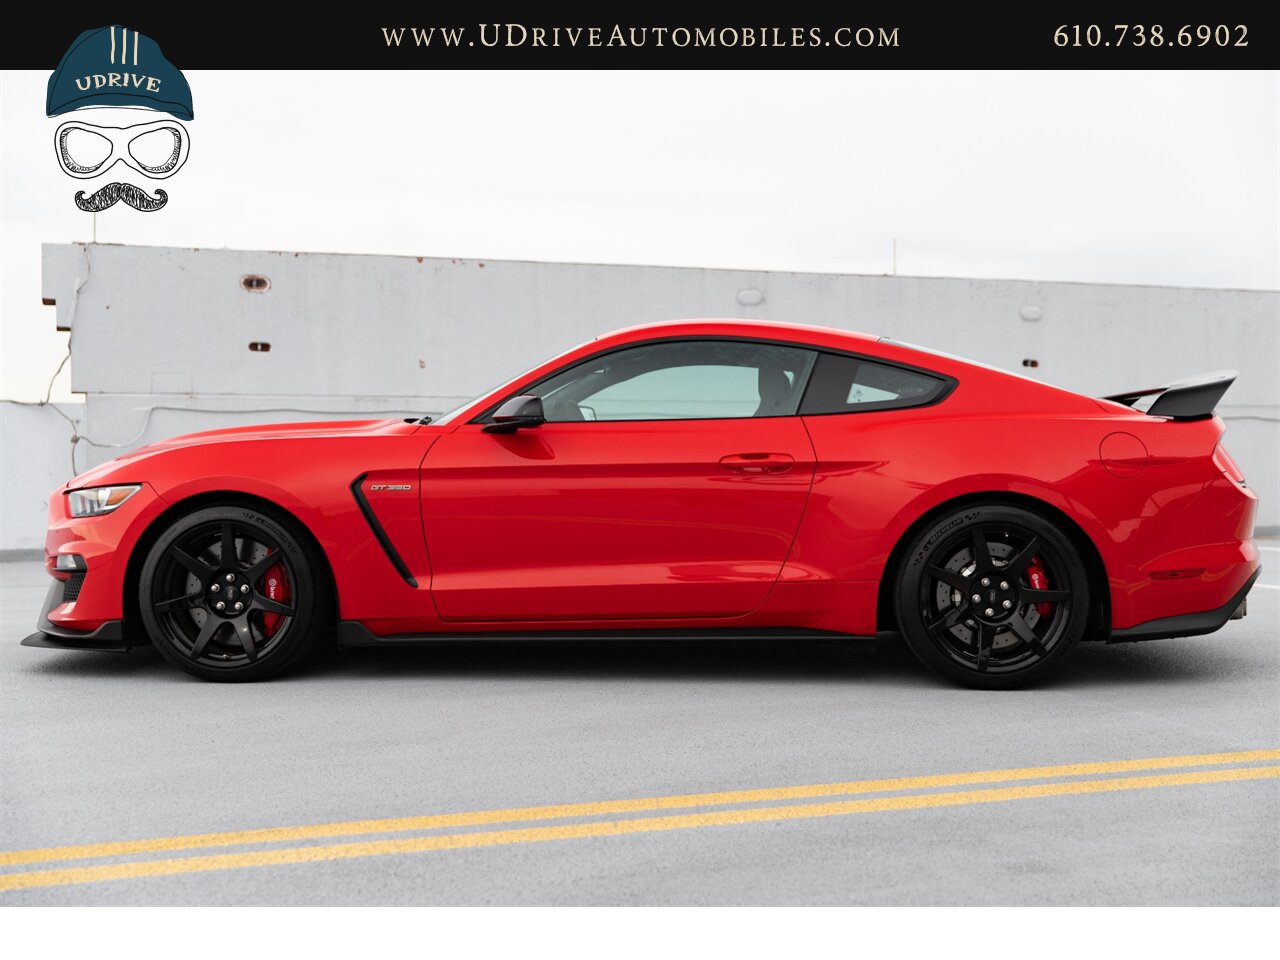 2016 Ford Mustang Shelby GT350R 3k Miles Electronics Pkg  1 of 32 Race Red Produced for USA As New - Photo 7 - West Chester, PA 19382